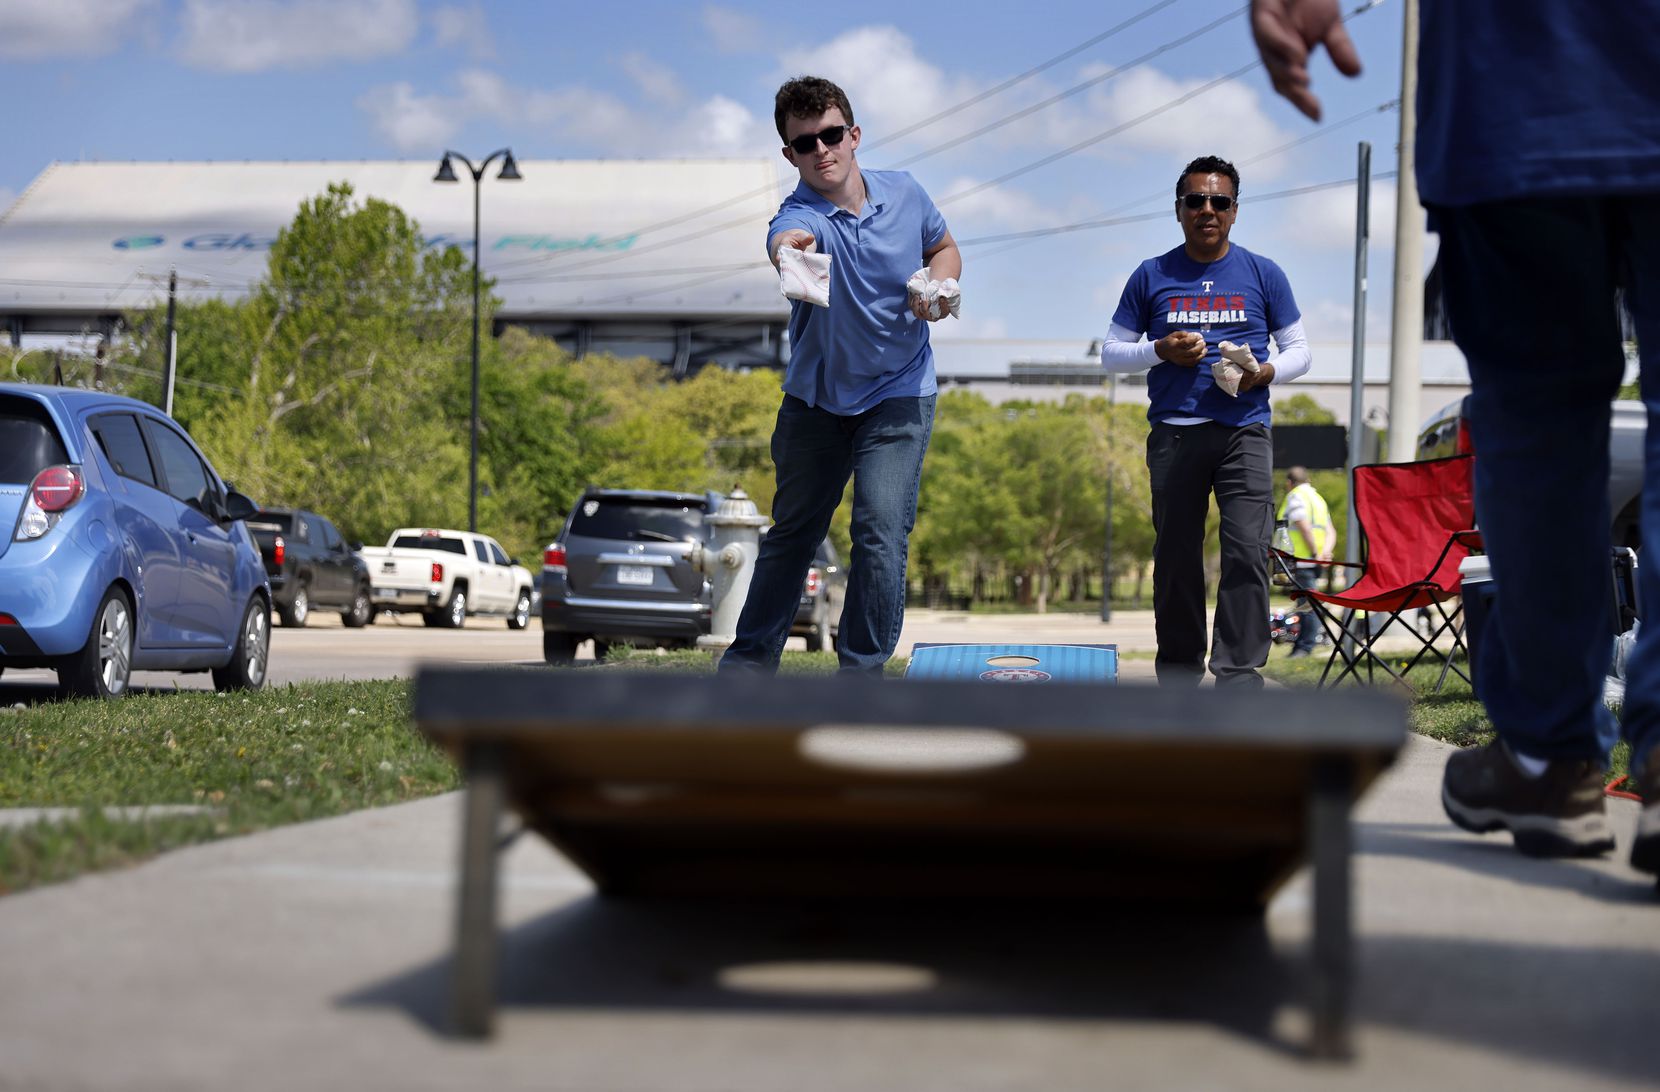 Texas Rangers fans Jack West (left) and Abney Herrera of Pantego play corn hole during an Opening Day tailgate party on private property outside of Globe Life Field in Arlington, Monday, April 5, 2021. The Rangers are facing the Toronto Blue Jays in the home opener. (Tom Fox/The Dallas Morning News)